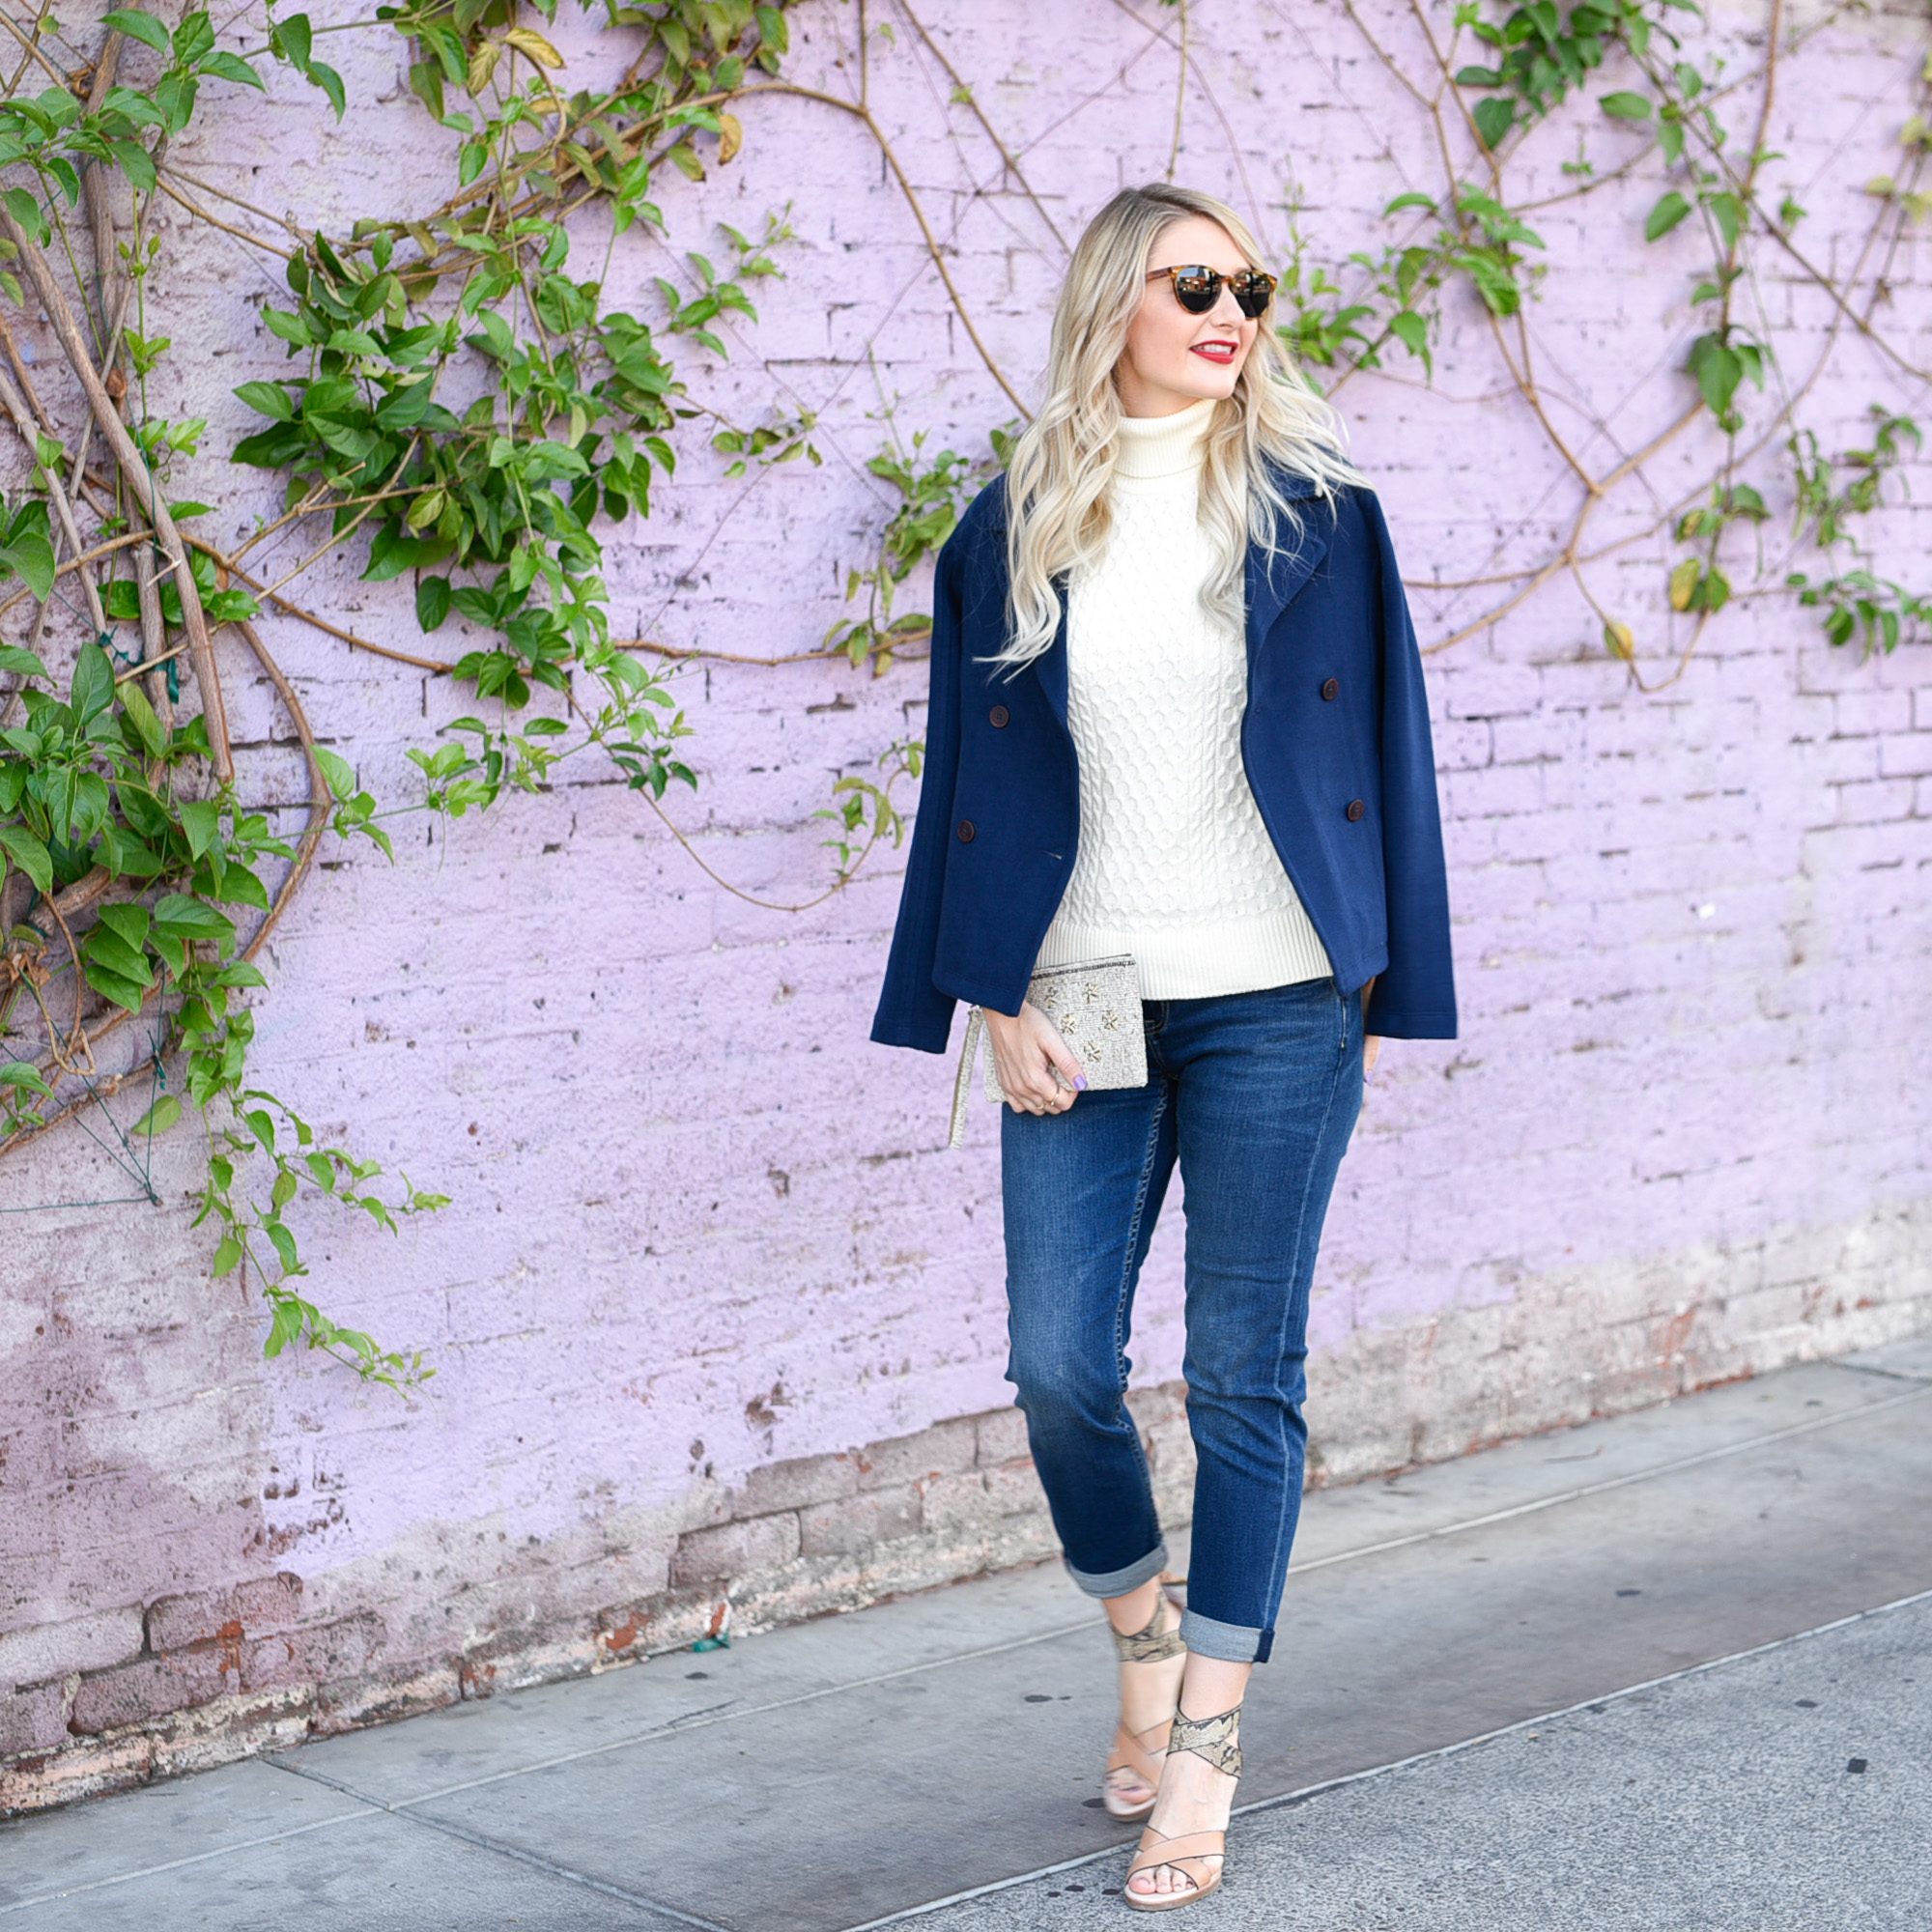 Jenna Colgrove wearing the Tommy Bahama Havana Blues cable turtleneck sweater.